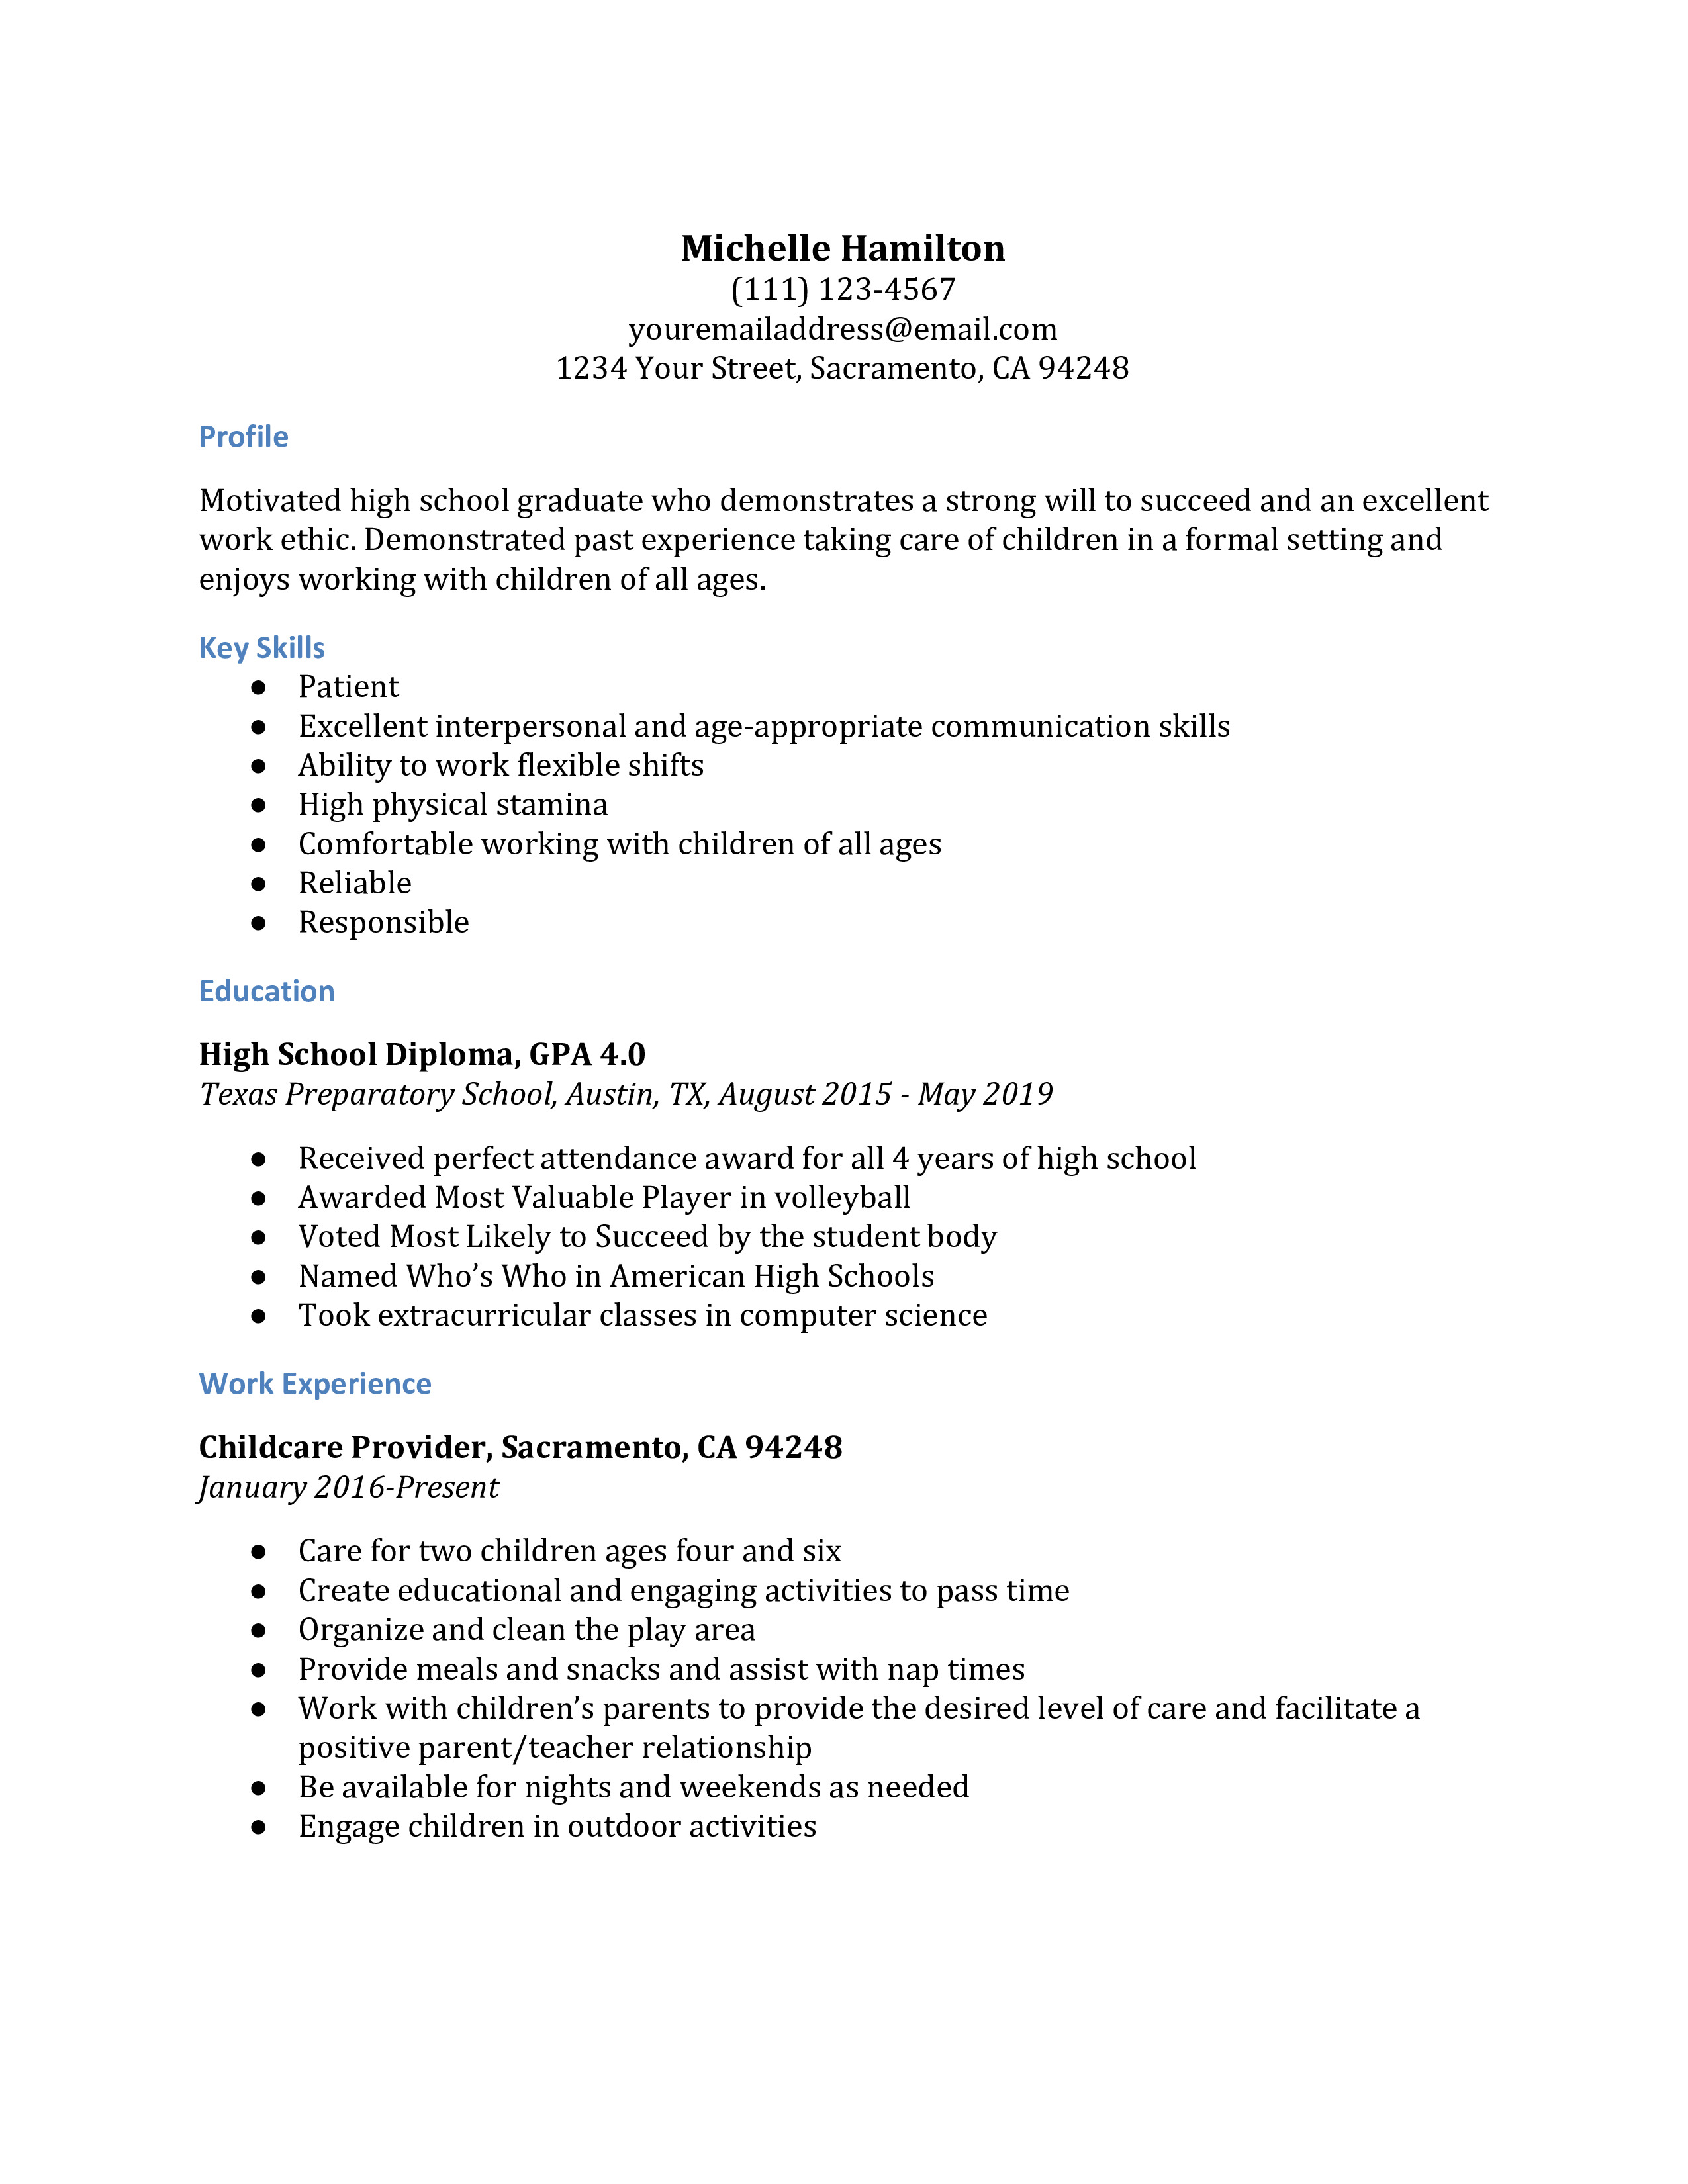 Basic resume examples for highschool students